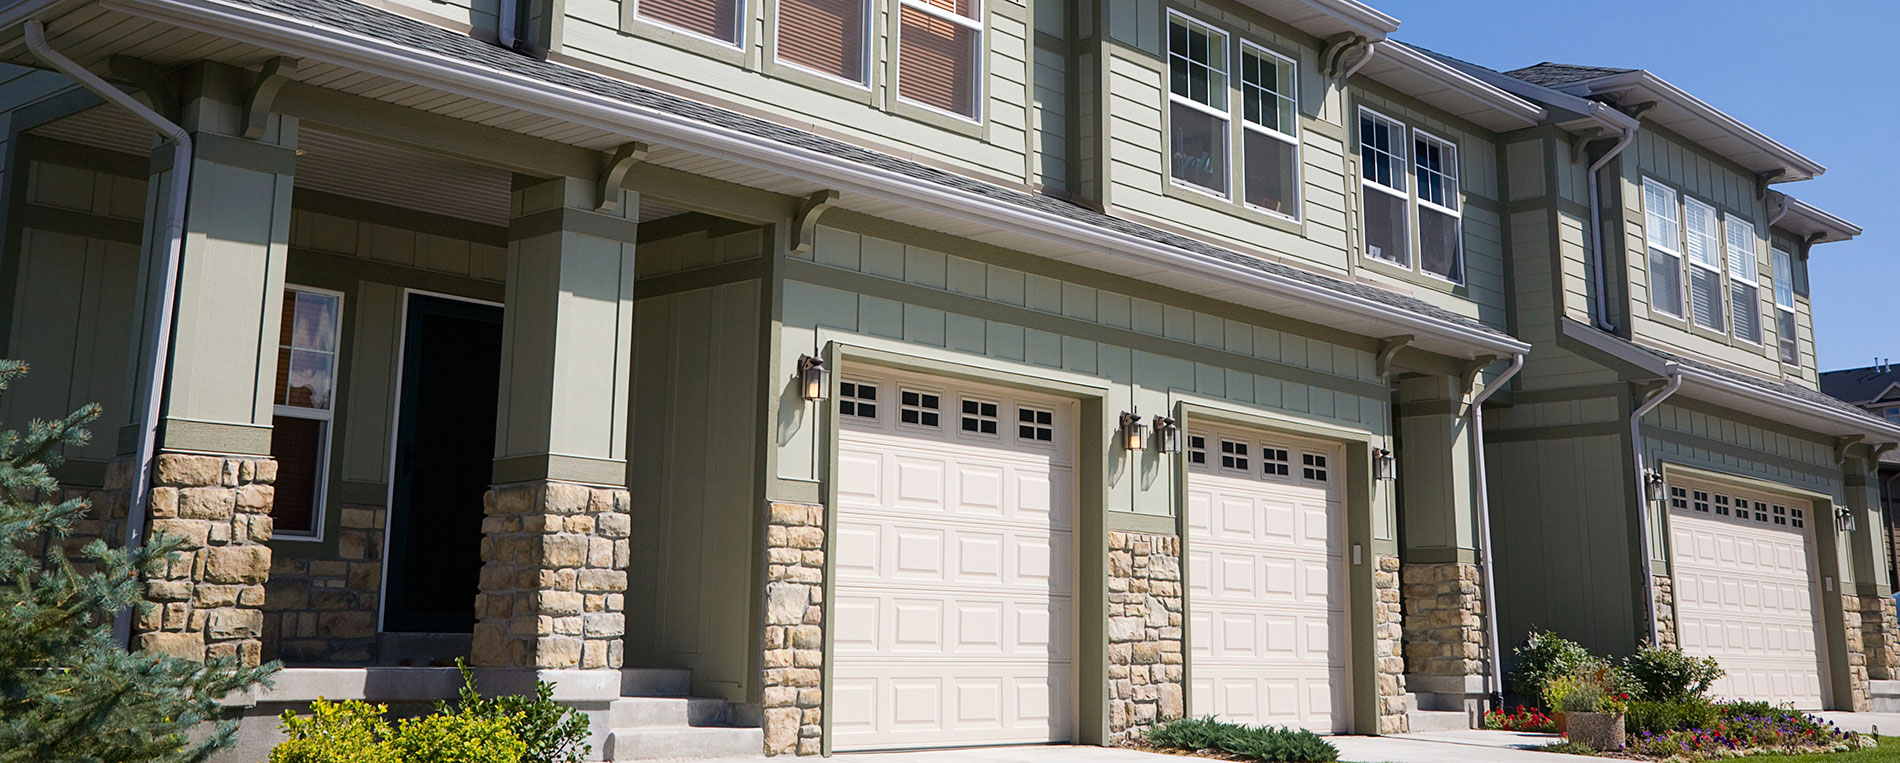 How to Make Your Garage Door Leave Great First Impression